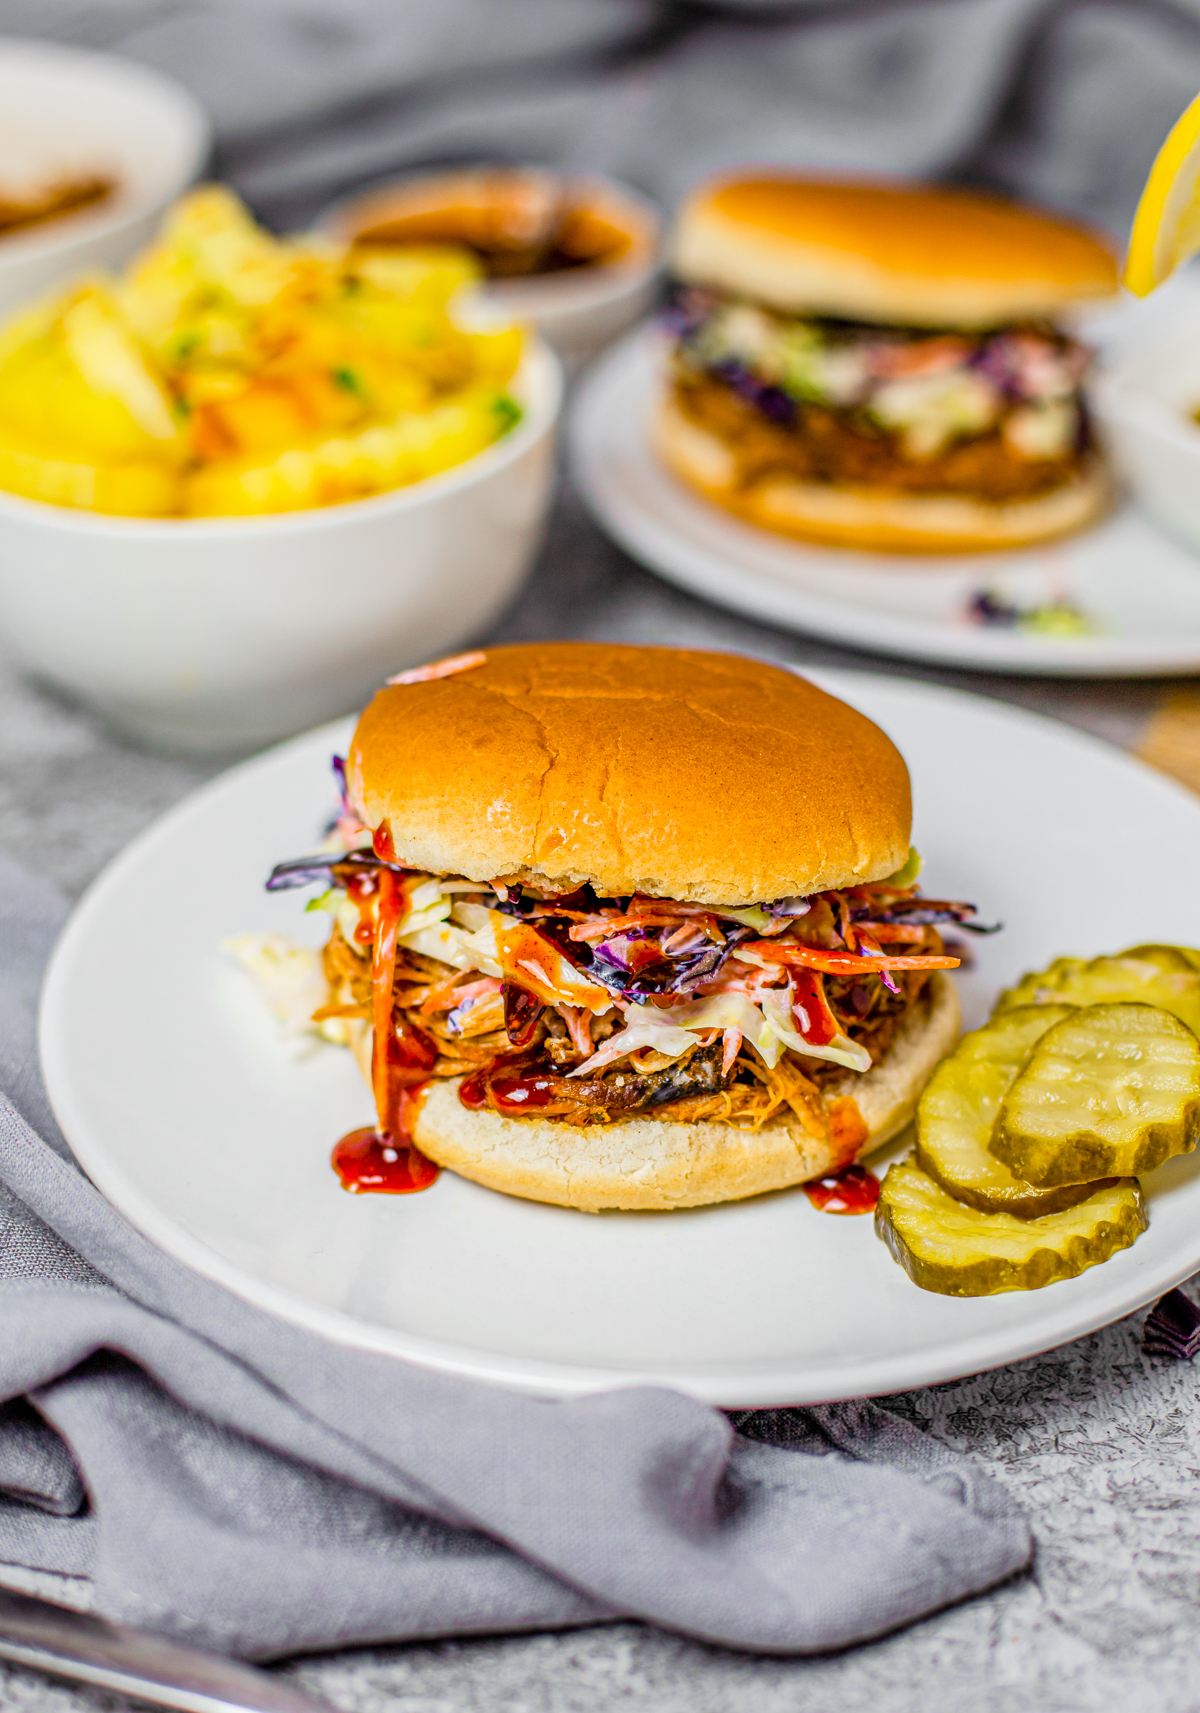 Crock Pot Pulled Pork Sandwich on white plate with pickles